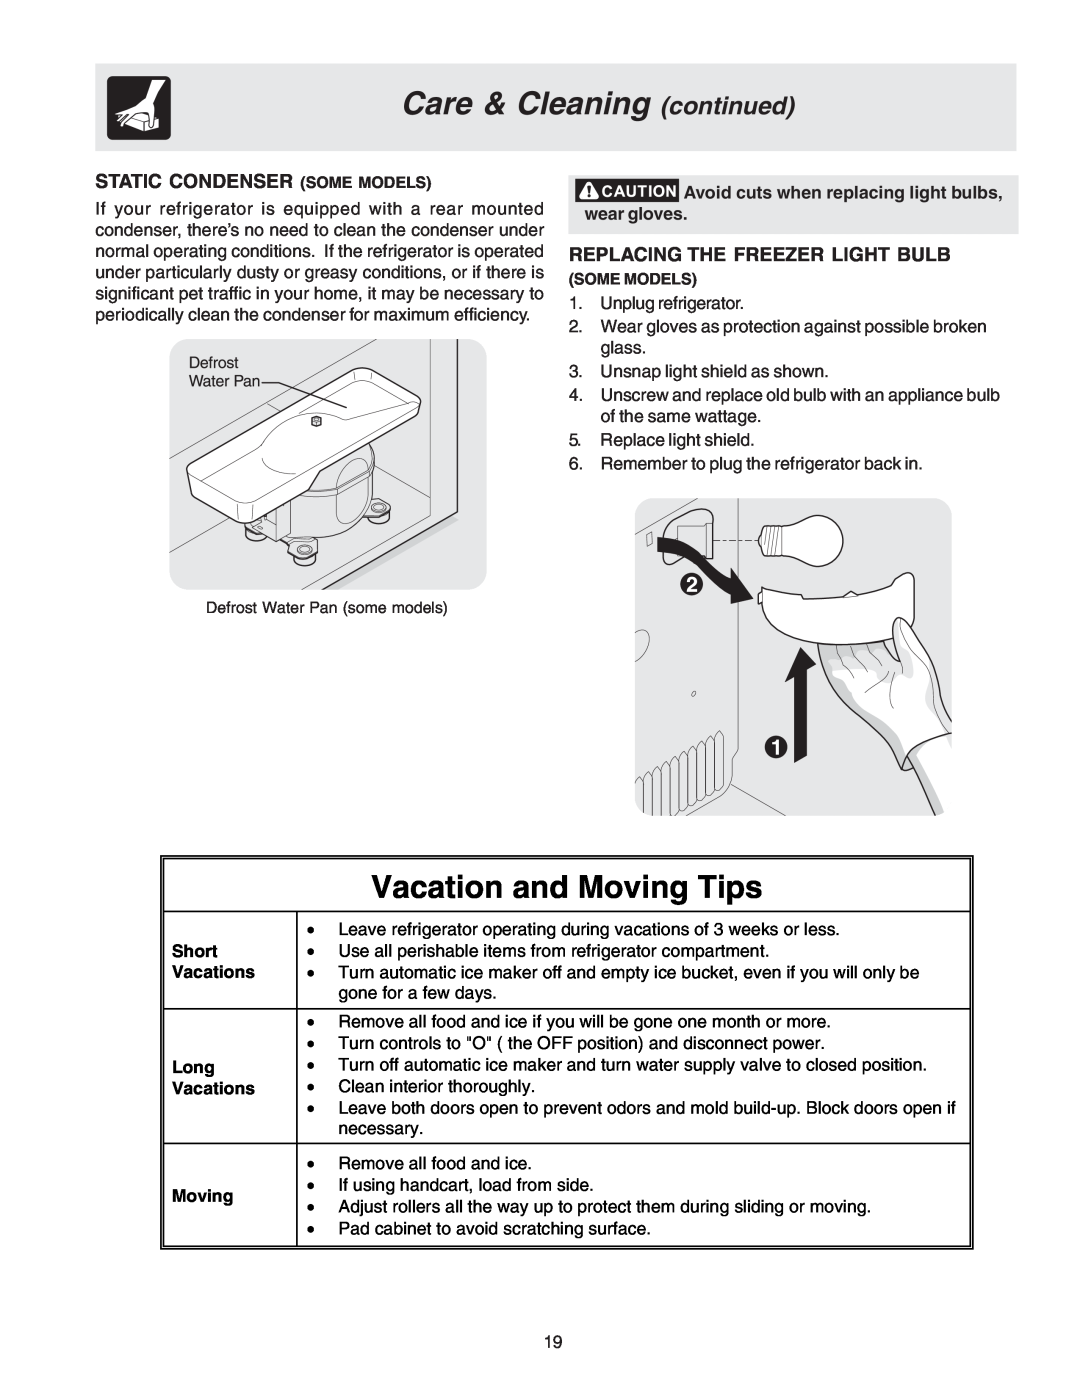 Crosley 241559900 manual Care & Cleaning continued, Vacation and Moving Tips, Static Condenser Some Models 